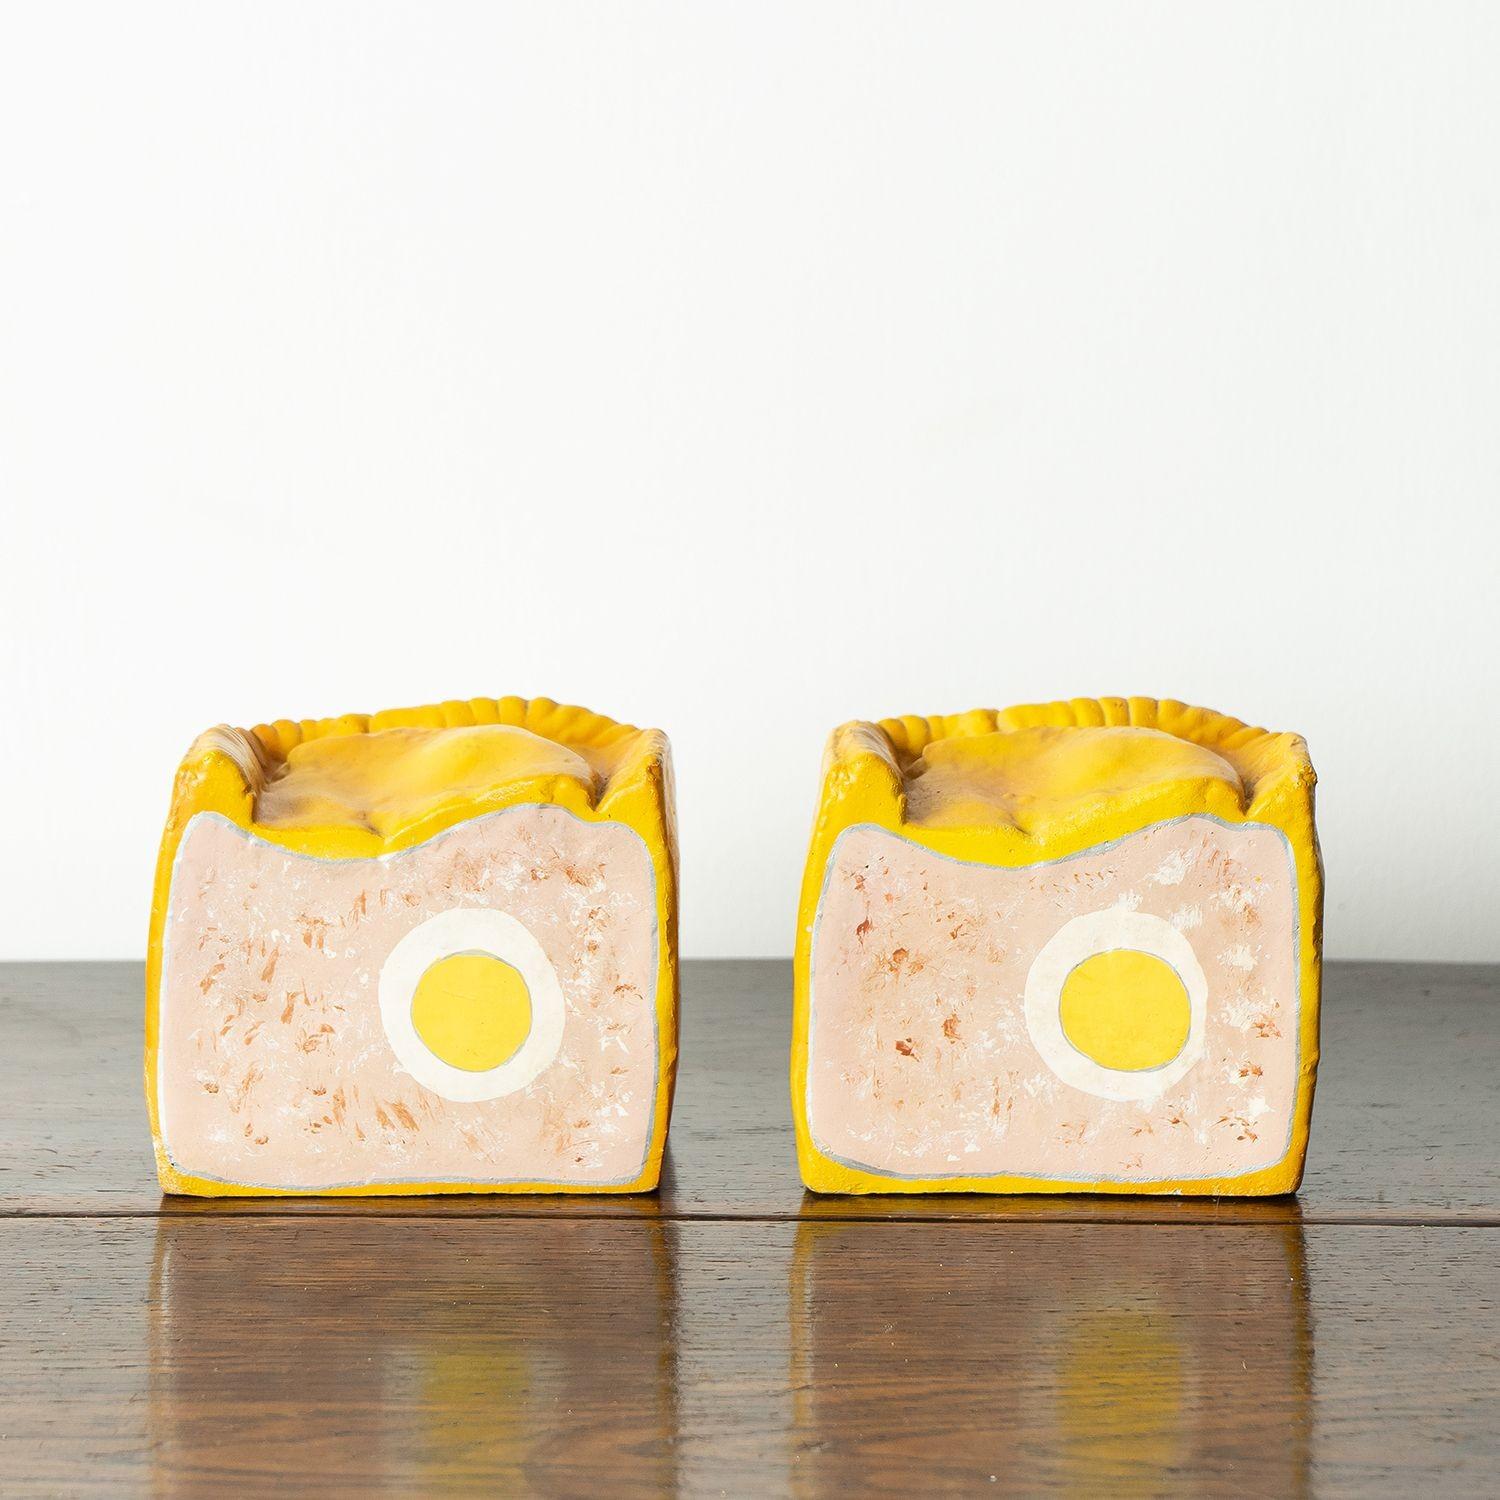 Midcentury shop display foods.
Originally made for and used for Electrolux refrigerator advertisements in the 1950s.
Three pieces in the form of a large pork pie with egg cut in half and a stack of six rashers of back bacon.
Made from cast rubber